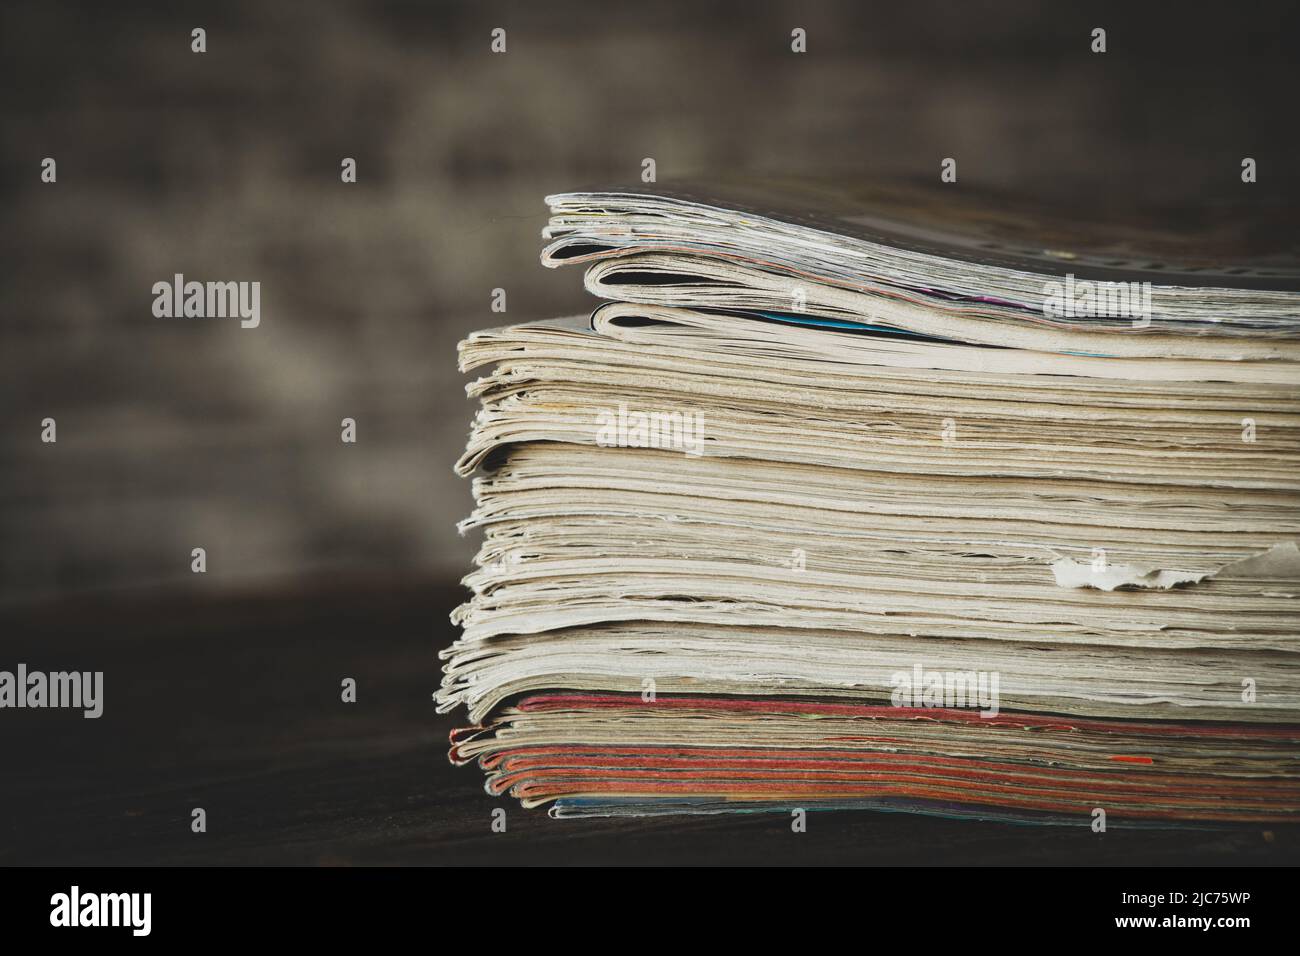 a stack of magazines and newspapers lies on the table, a daily newspaper Stock Photo